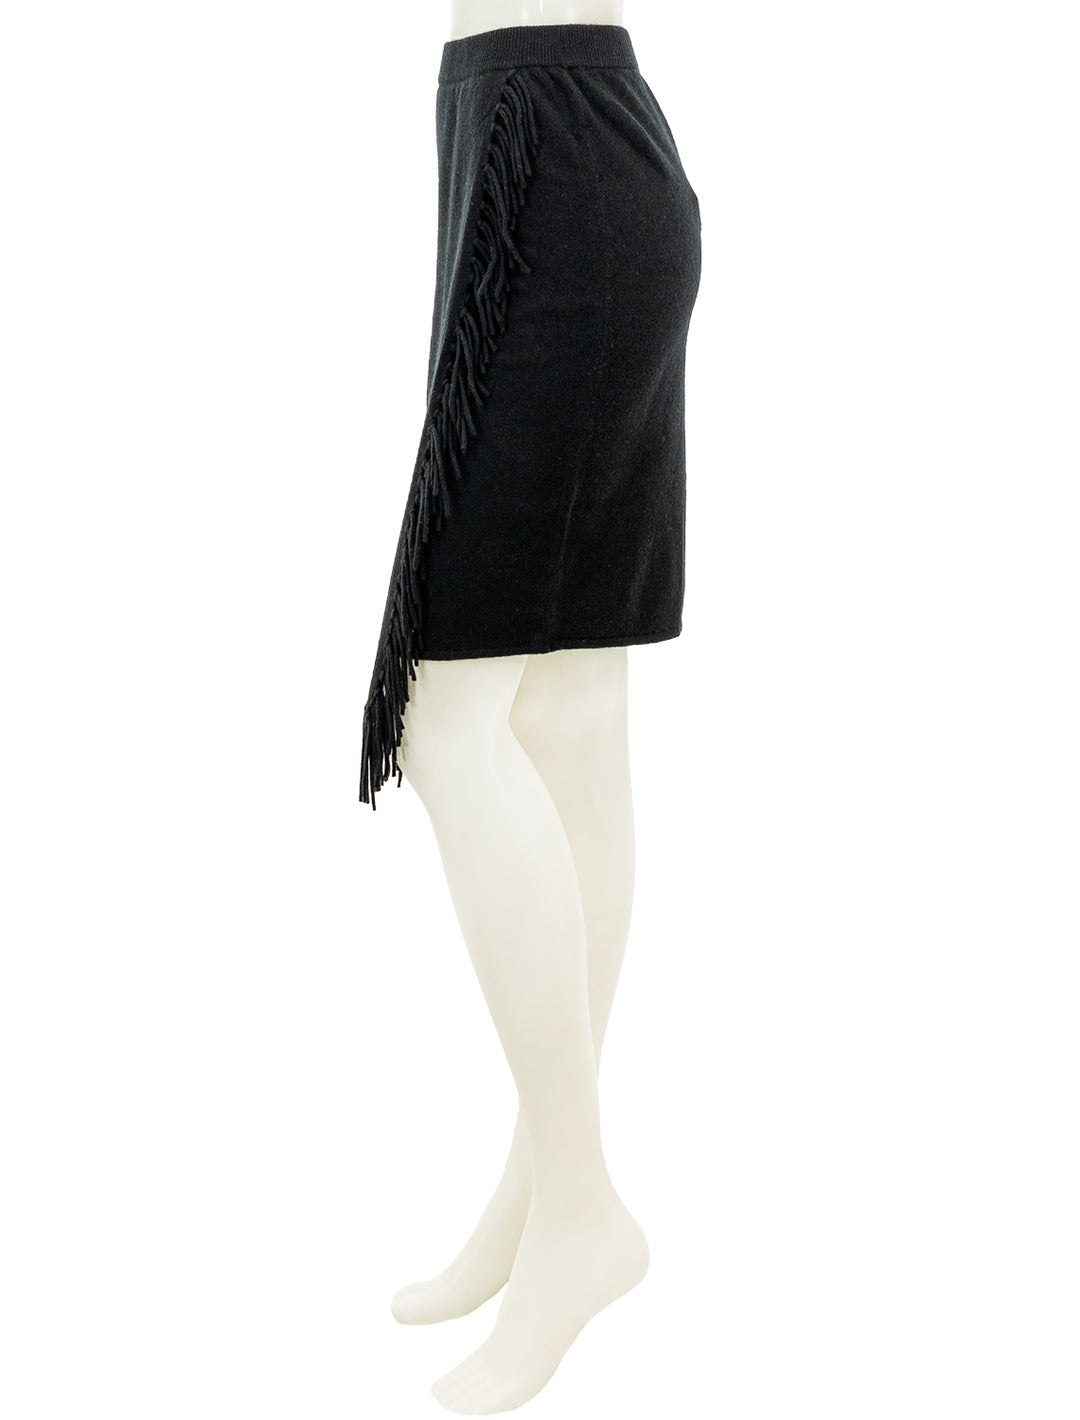 Side view of Minnie Rose's wrap skirt with fringe in black.